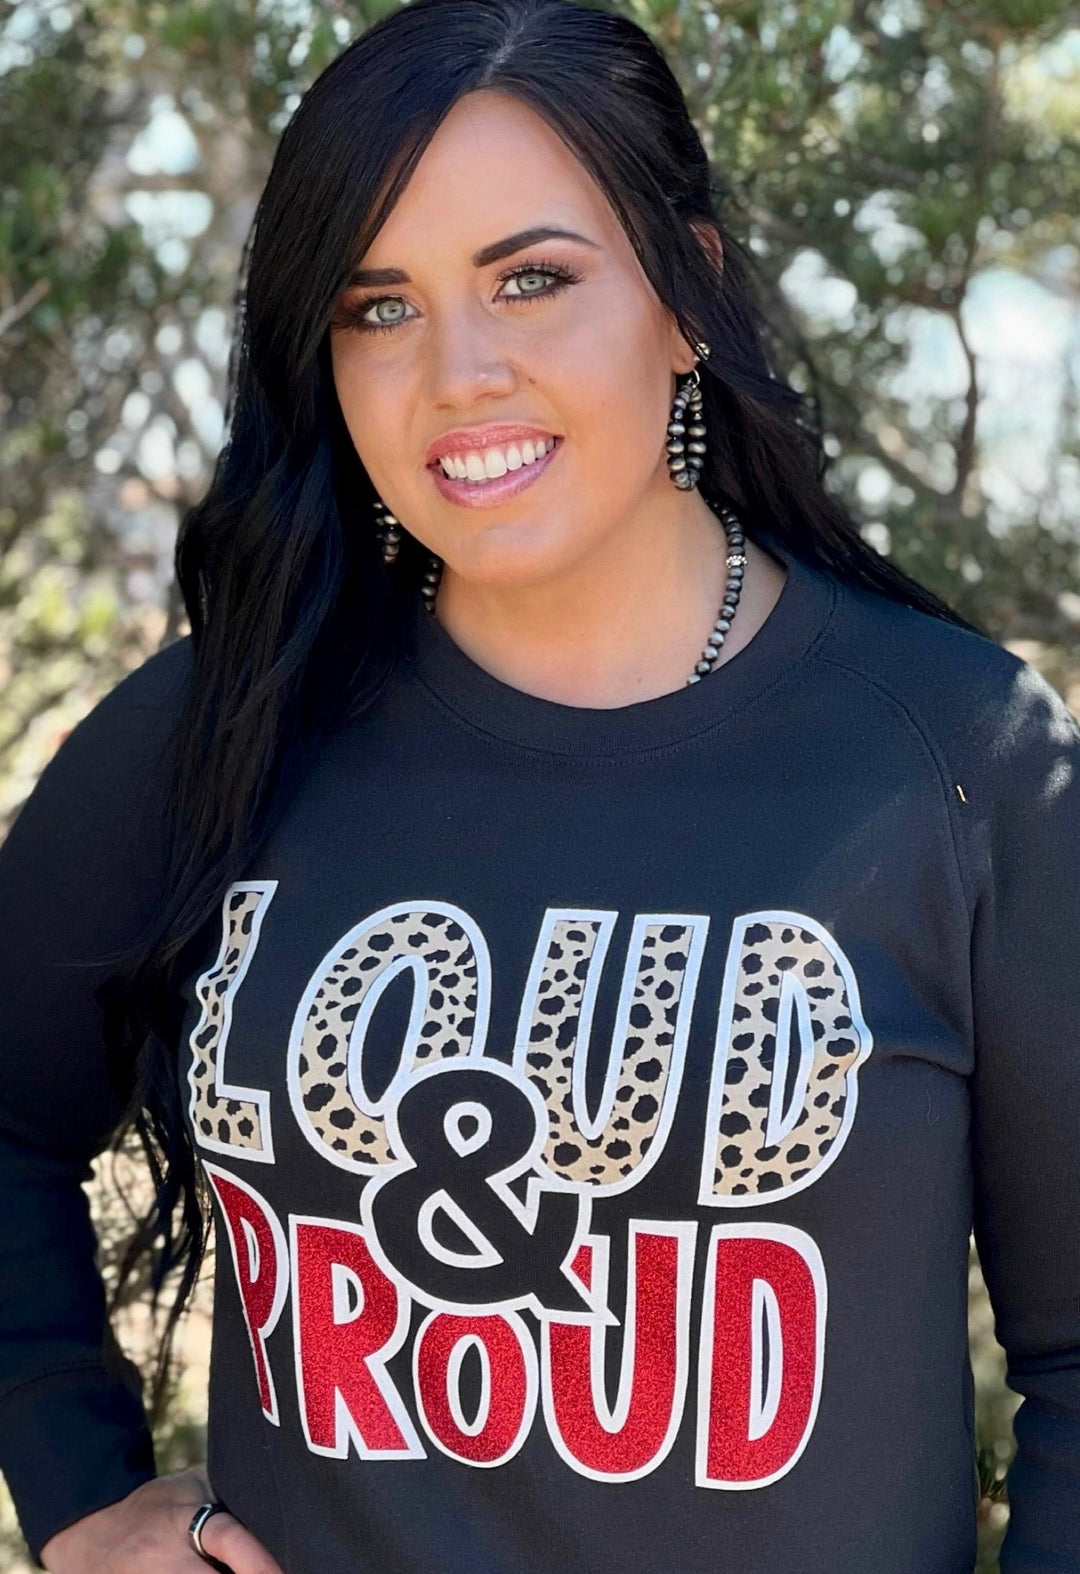 Loud & Proud Charblack Graphic Tee by Texas True Threads